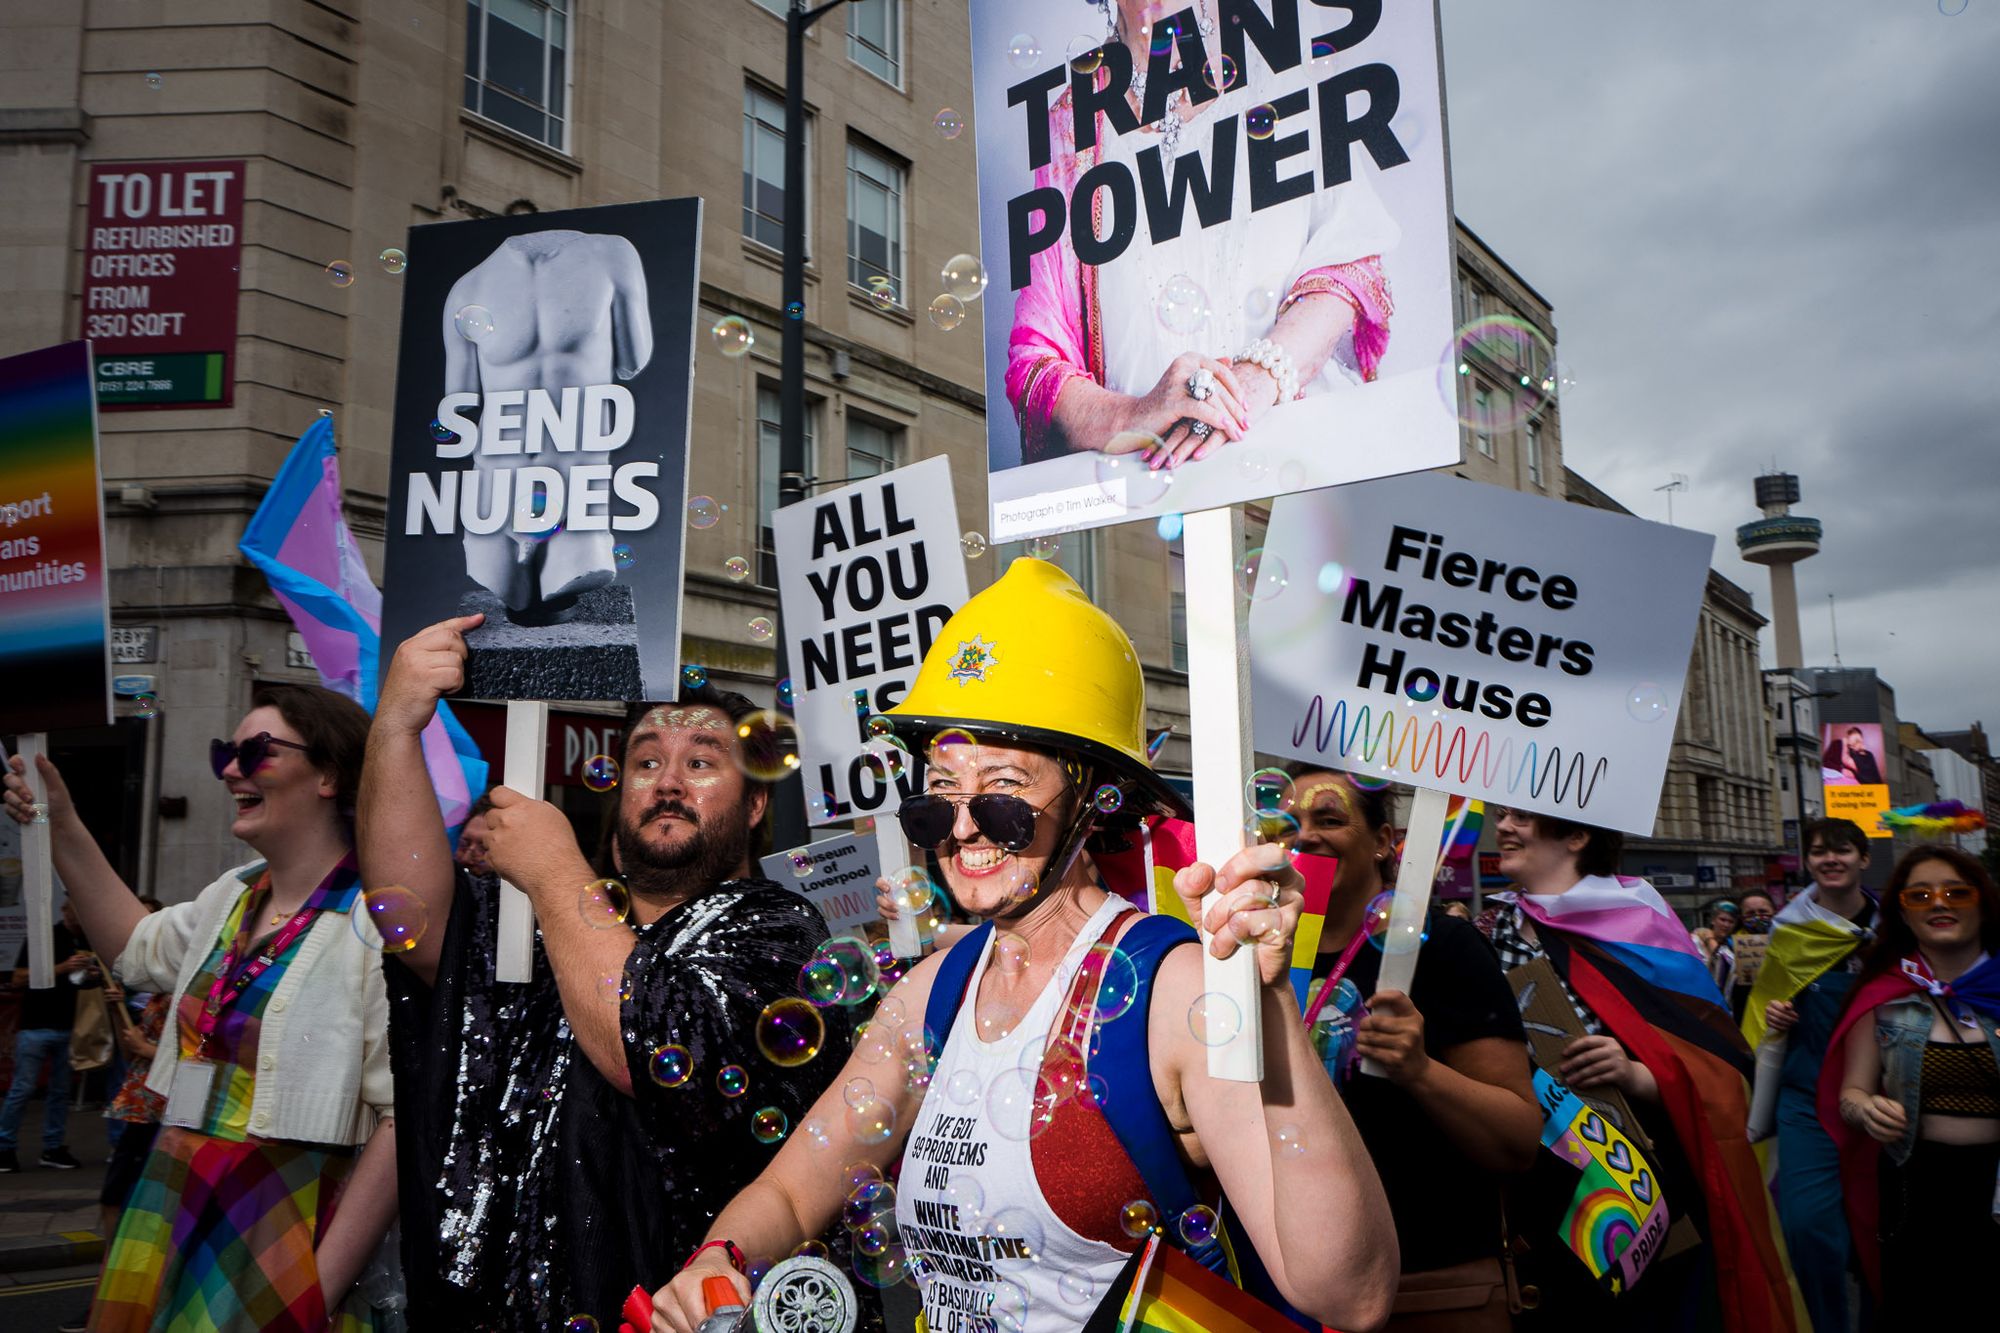 People from National Museums Liverpool march with placards. One says "Fierce Masters House". Another says "All you need is love." Another says "Trans Power" with a photo of April Ashley on. The last says "Send Nudes" over a photo of a marble statue.